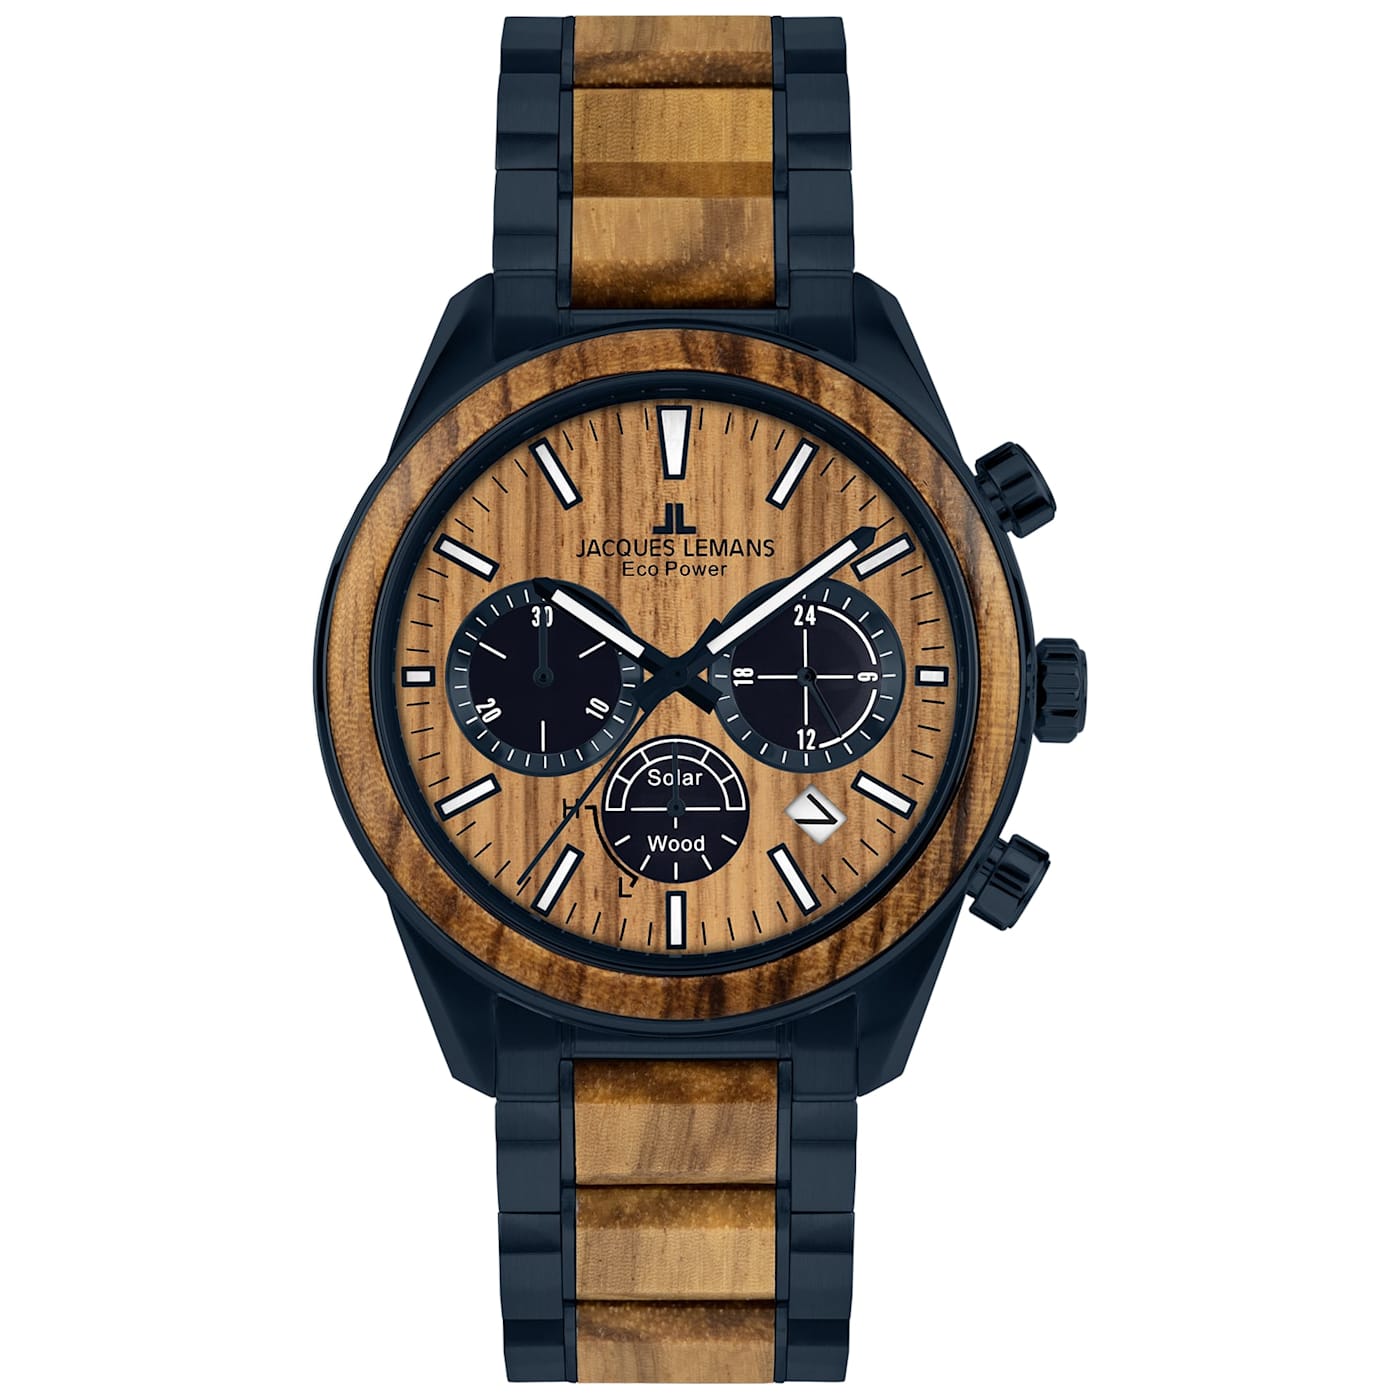 JACQUES LEMANS Eco Power Men\'s Watch w/Stainless Steel/Wood Inlay Strap  Blue, Chronograph 1-2115 - 12KT3A